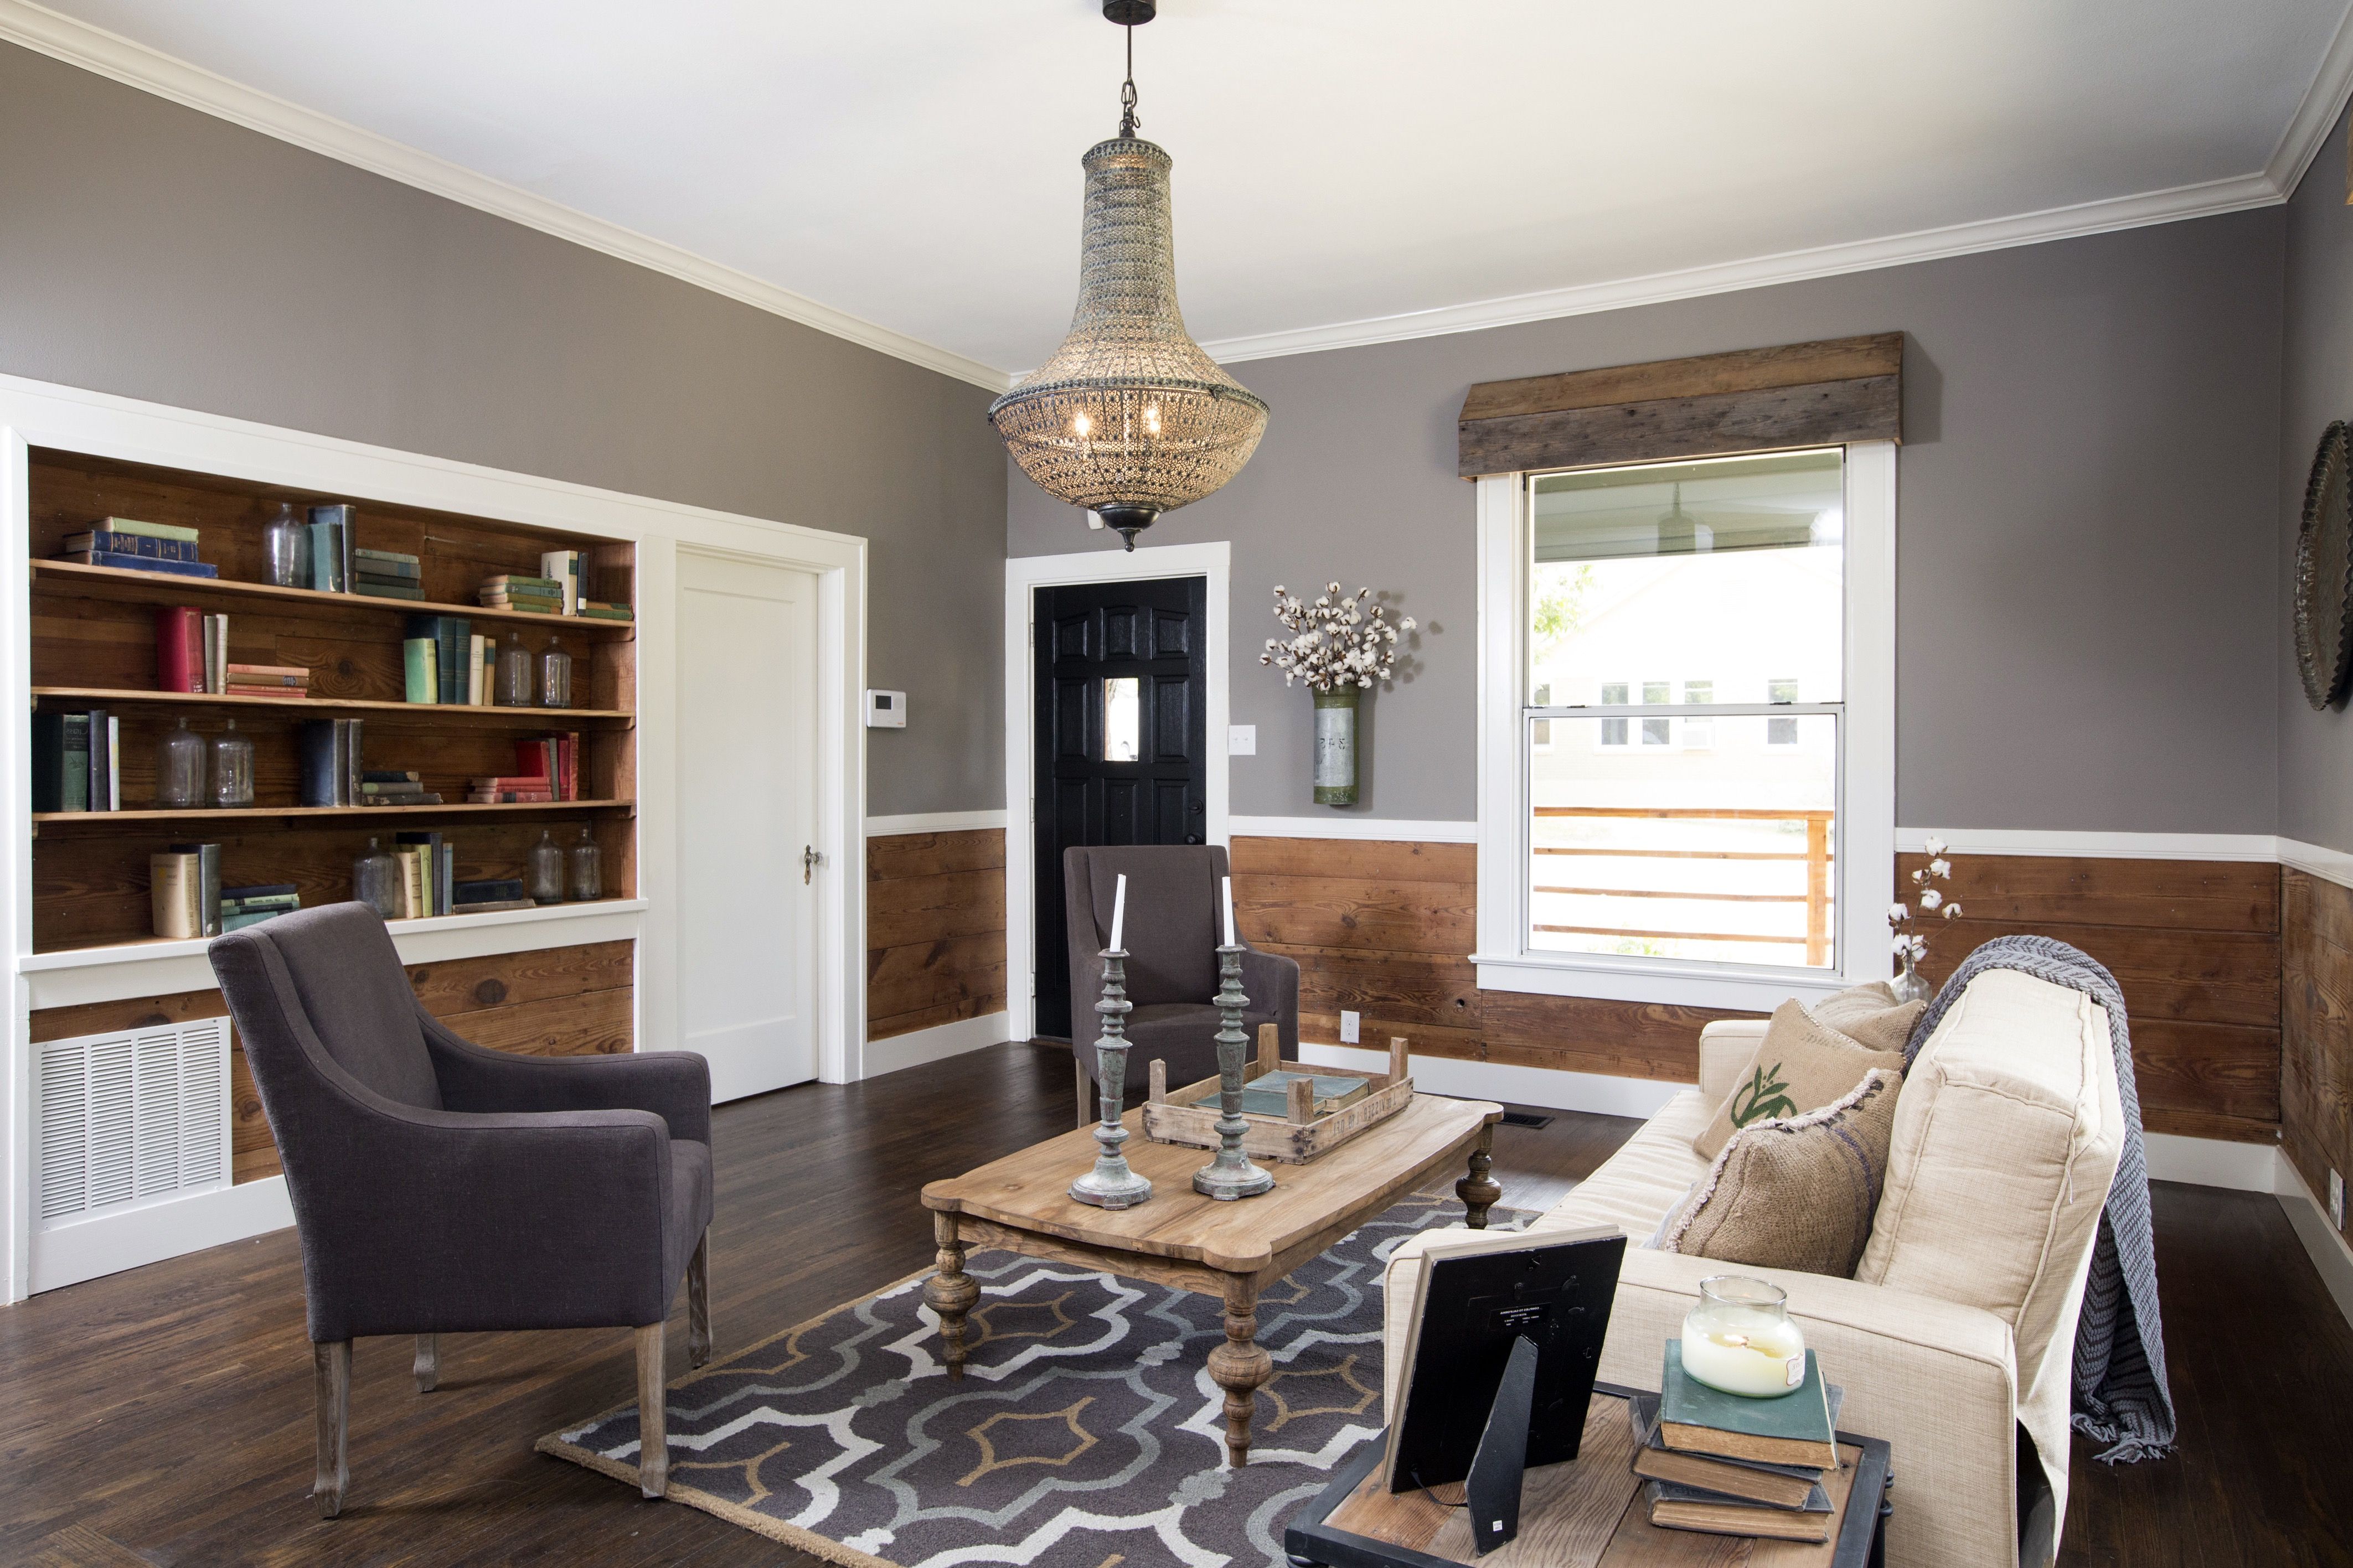 Modern Neutral Rustic Living Room In Cozy Style (View 23 of 36)